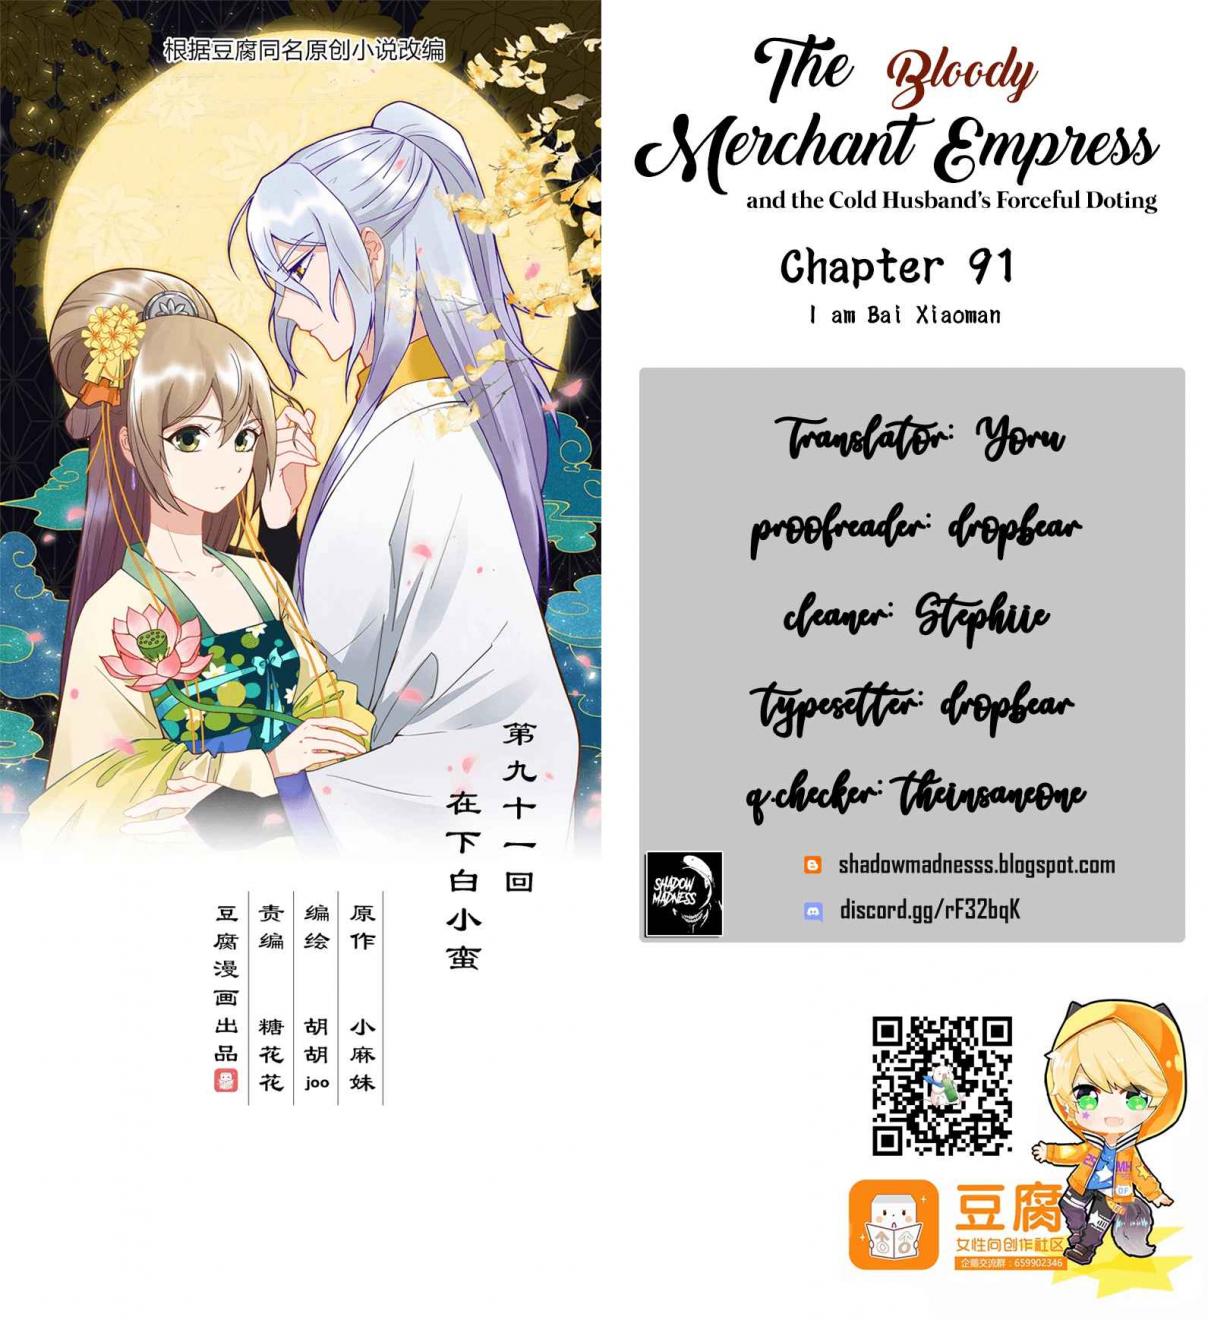 The Bloody Merchant Empress and the Cold Husband's Forceful Doting Ch. 91 I am Bai Xiaoman